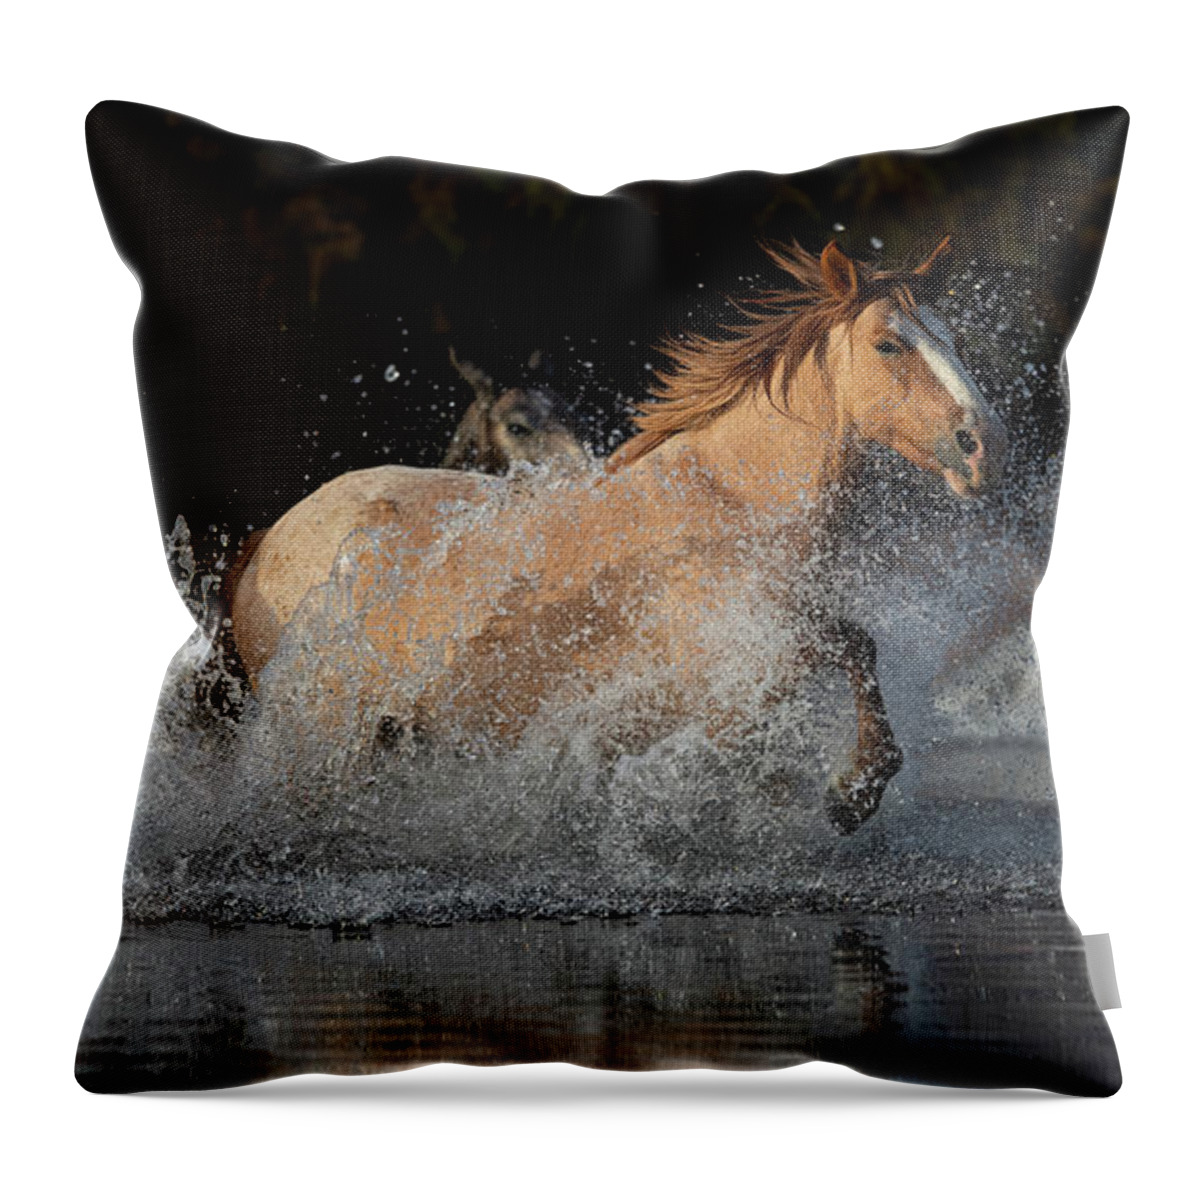 Horse Throw Pillow featuring the photograph River Run by Shannon Hastings